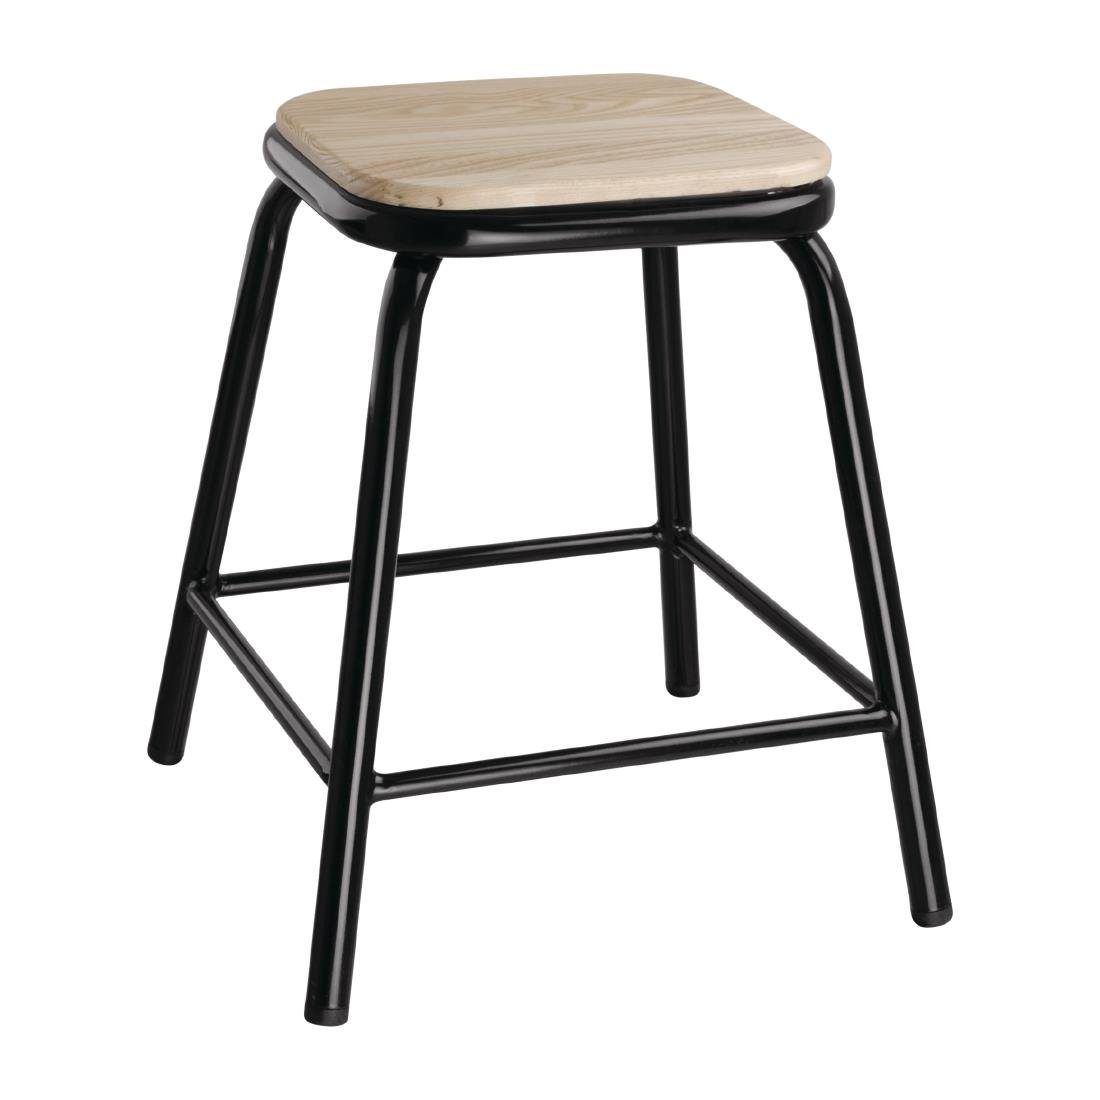 Set of 4 Calerio Industrial Fixed Height Bar Stools.